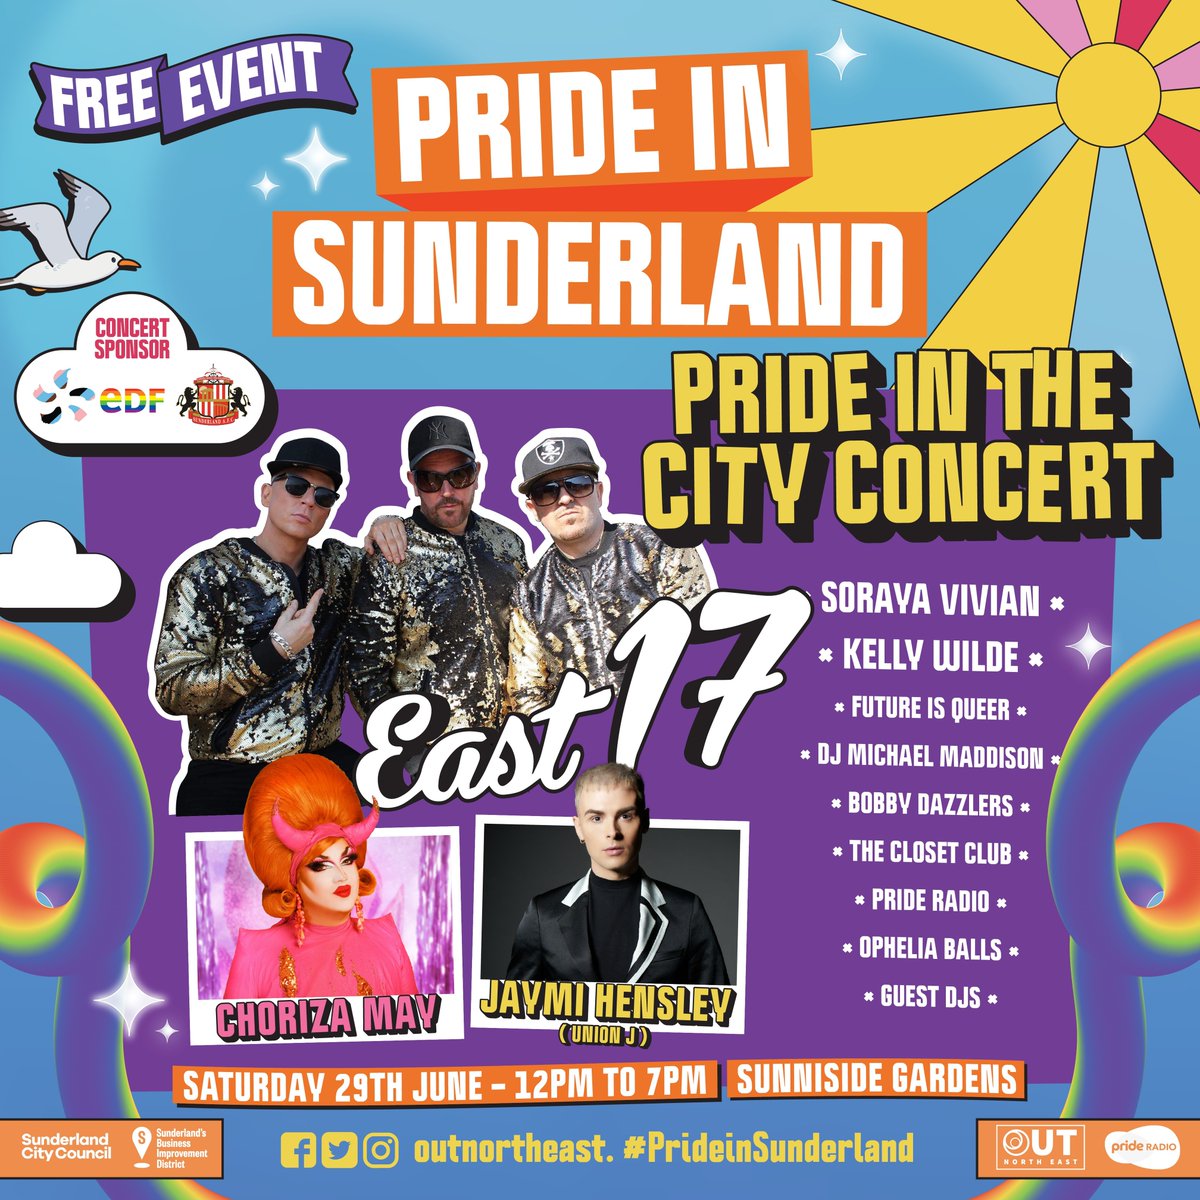 Get ready to party Sunderland as we bring you the biggest, free pride concert ever! Headlining our main stage this year, is international boyband, East 17. Come along and enjoy to celebrate Pride in Sunderland! 🏳️‍🌈 orlo.uk/xMaUx